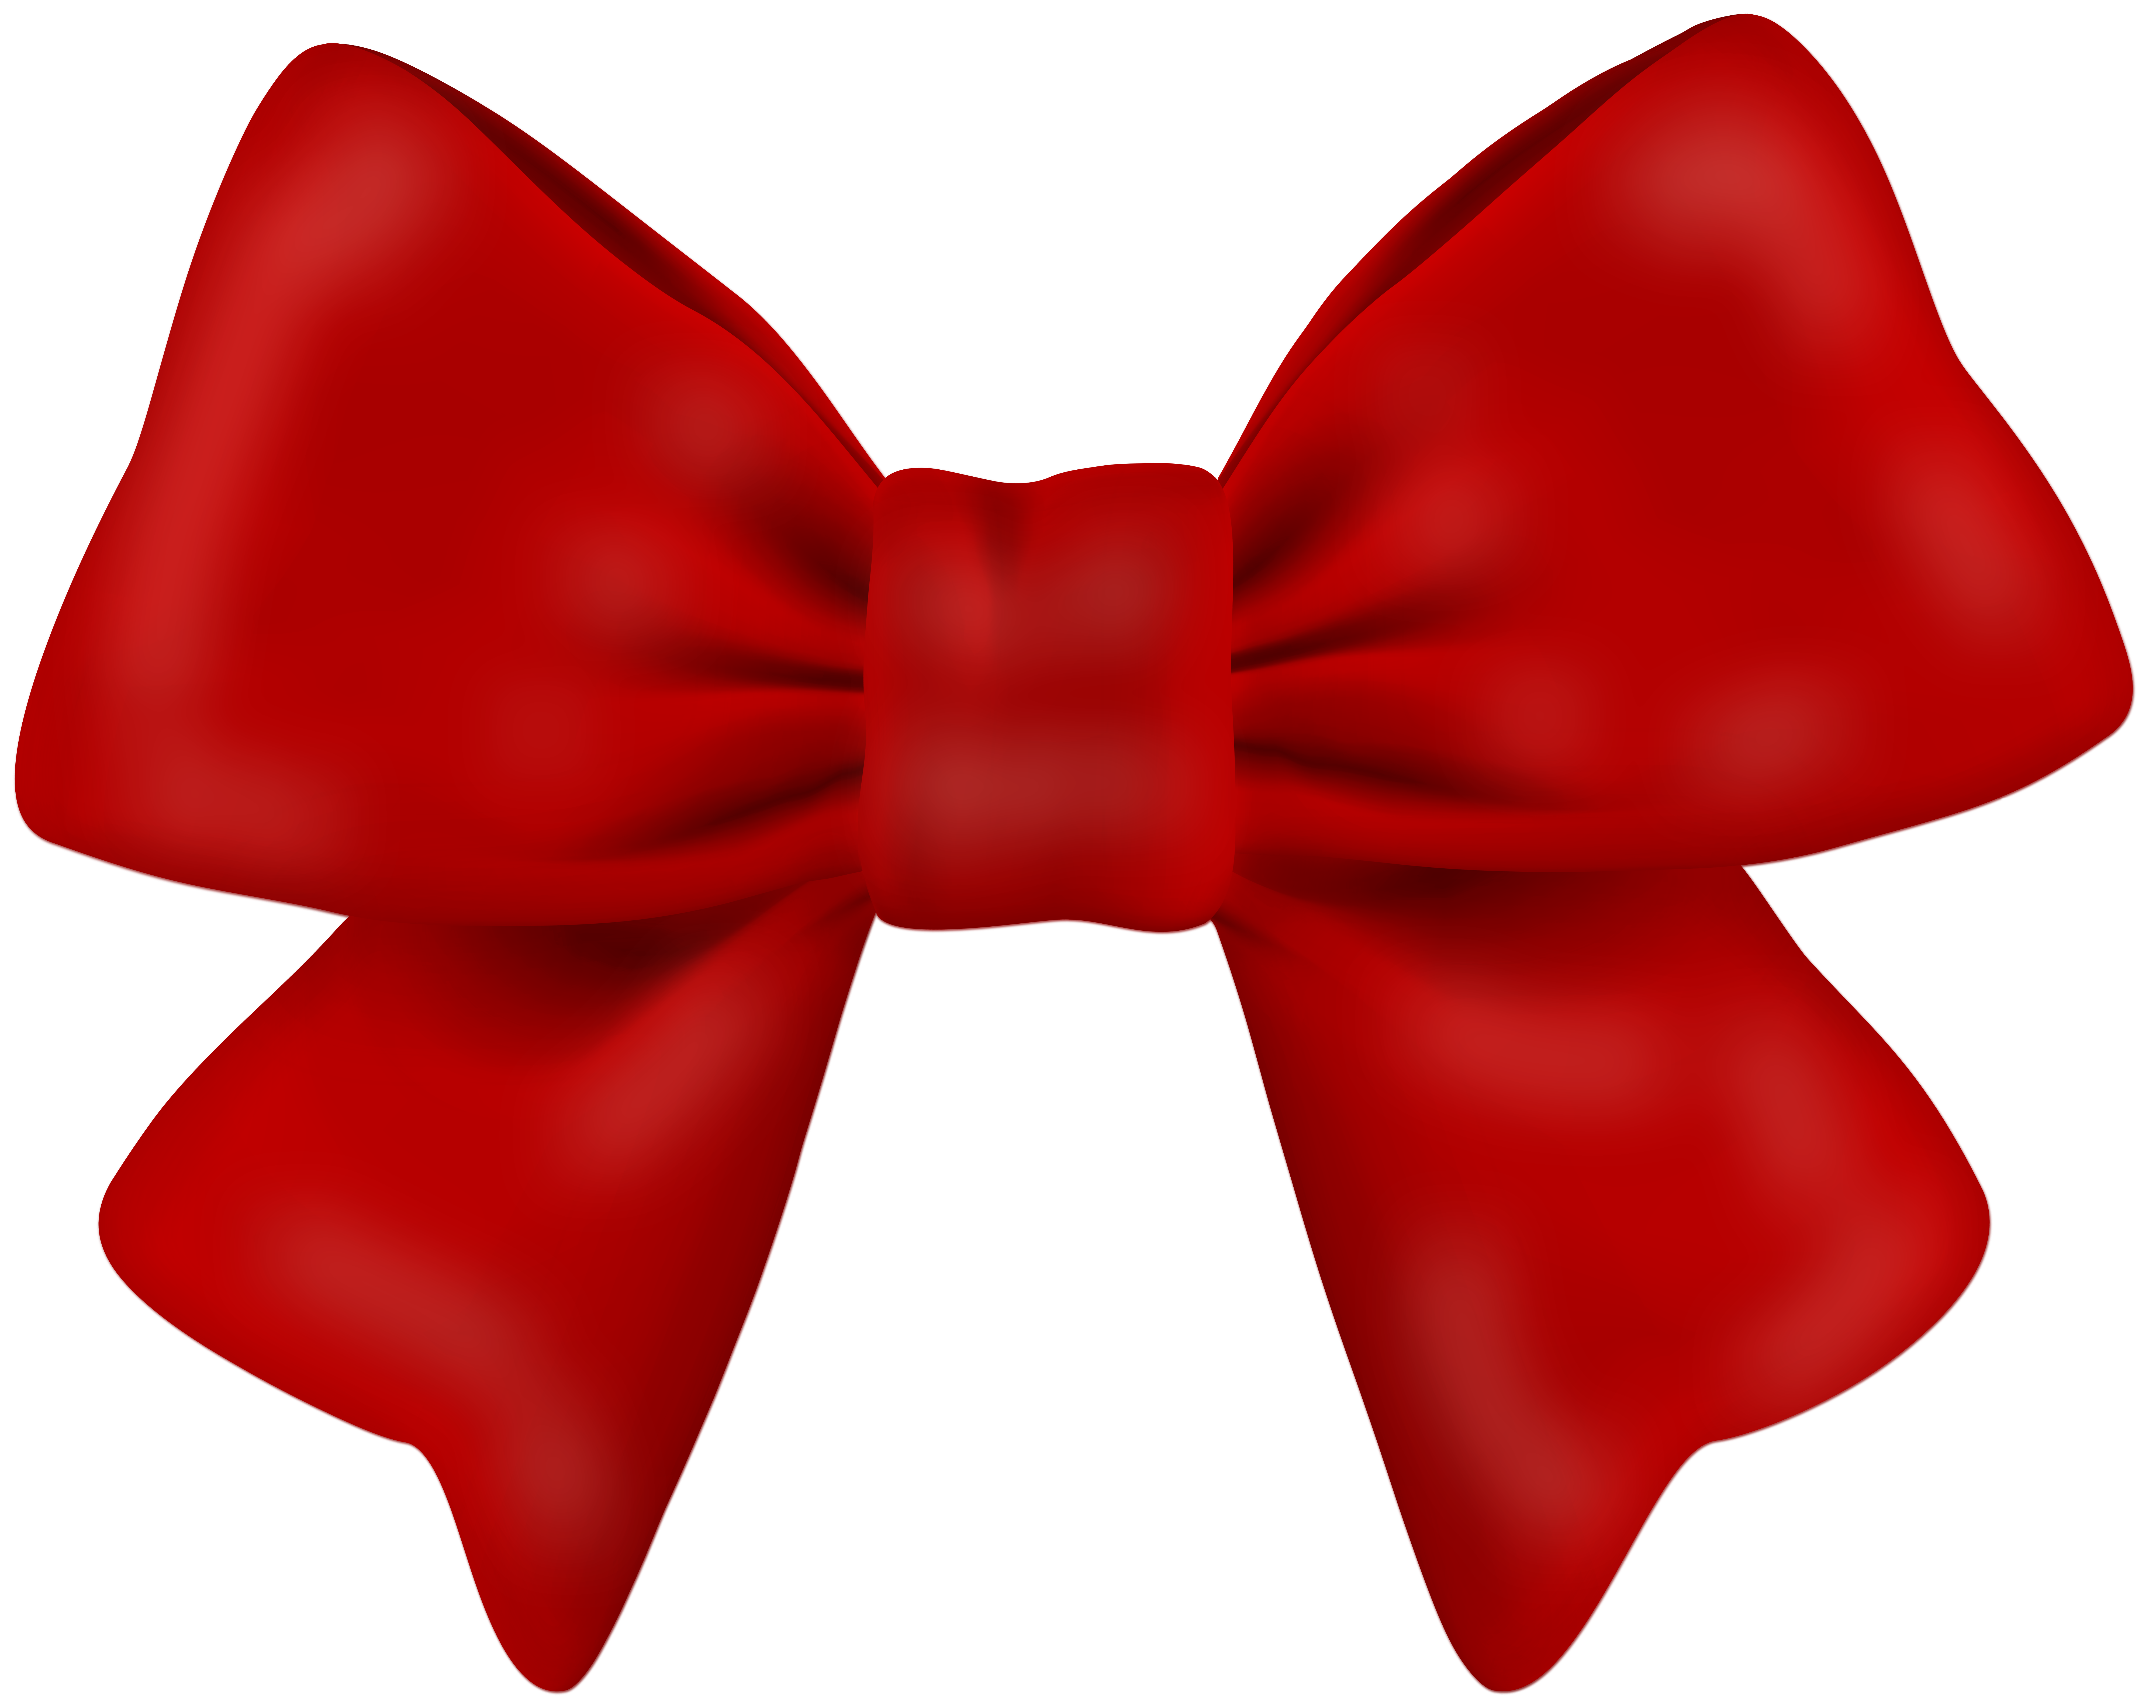 Red Ribbon PNGs for Free Download